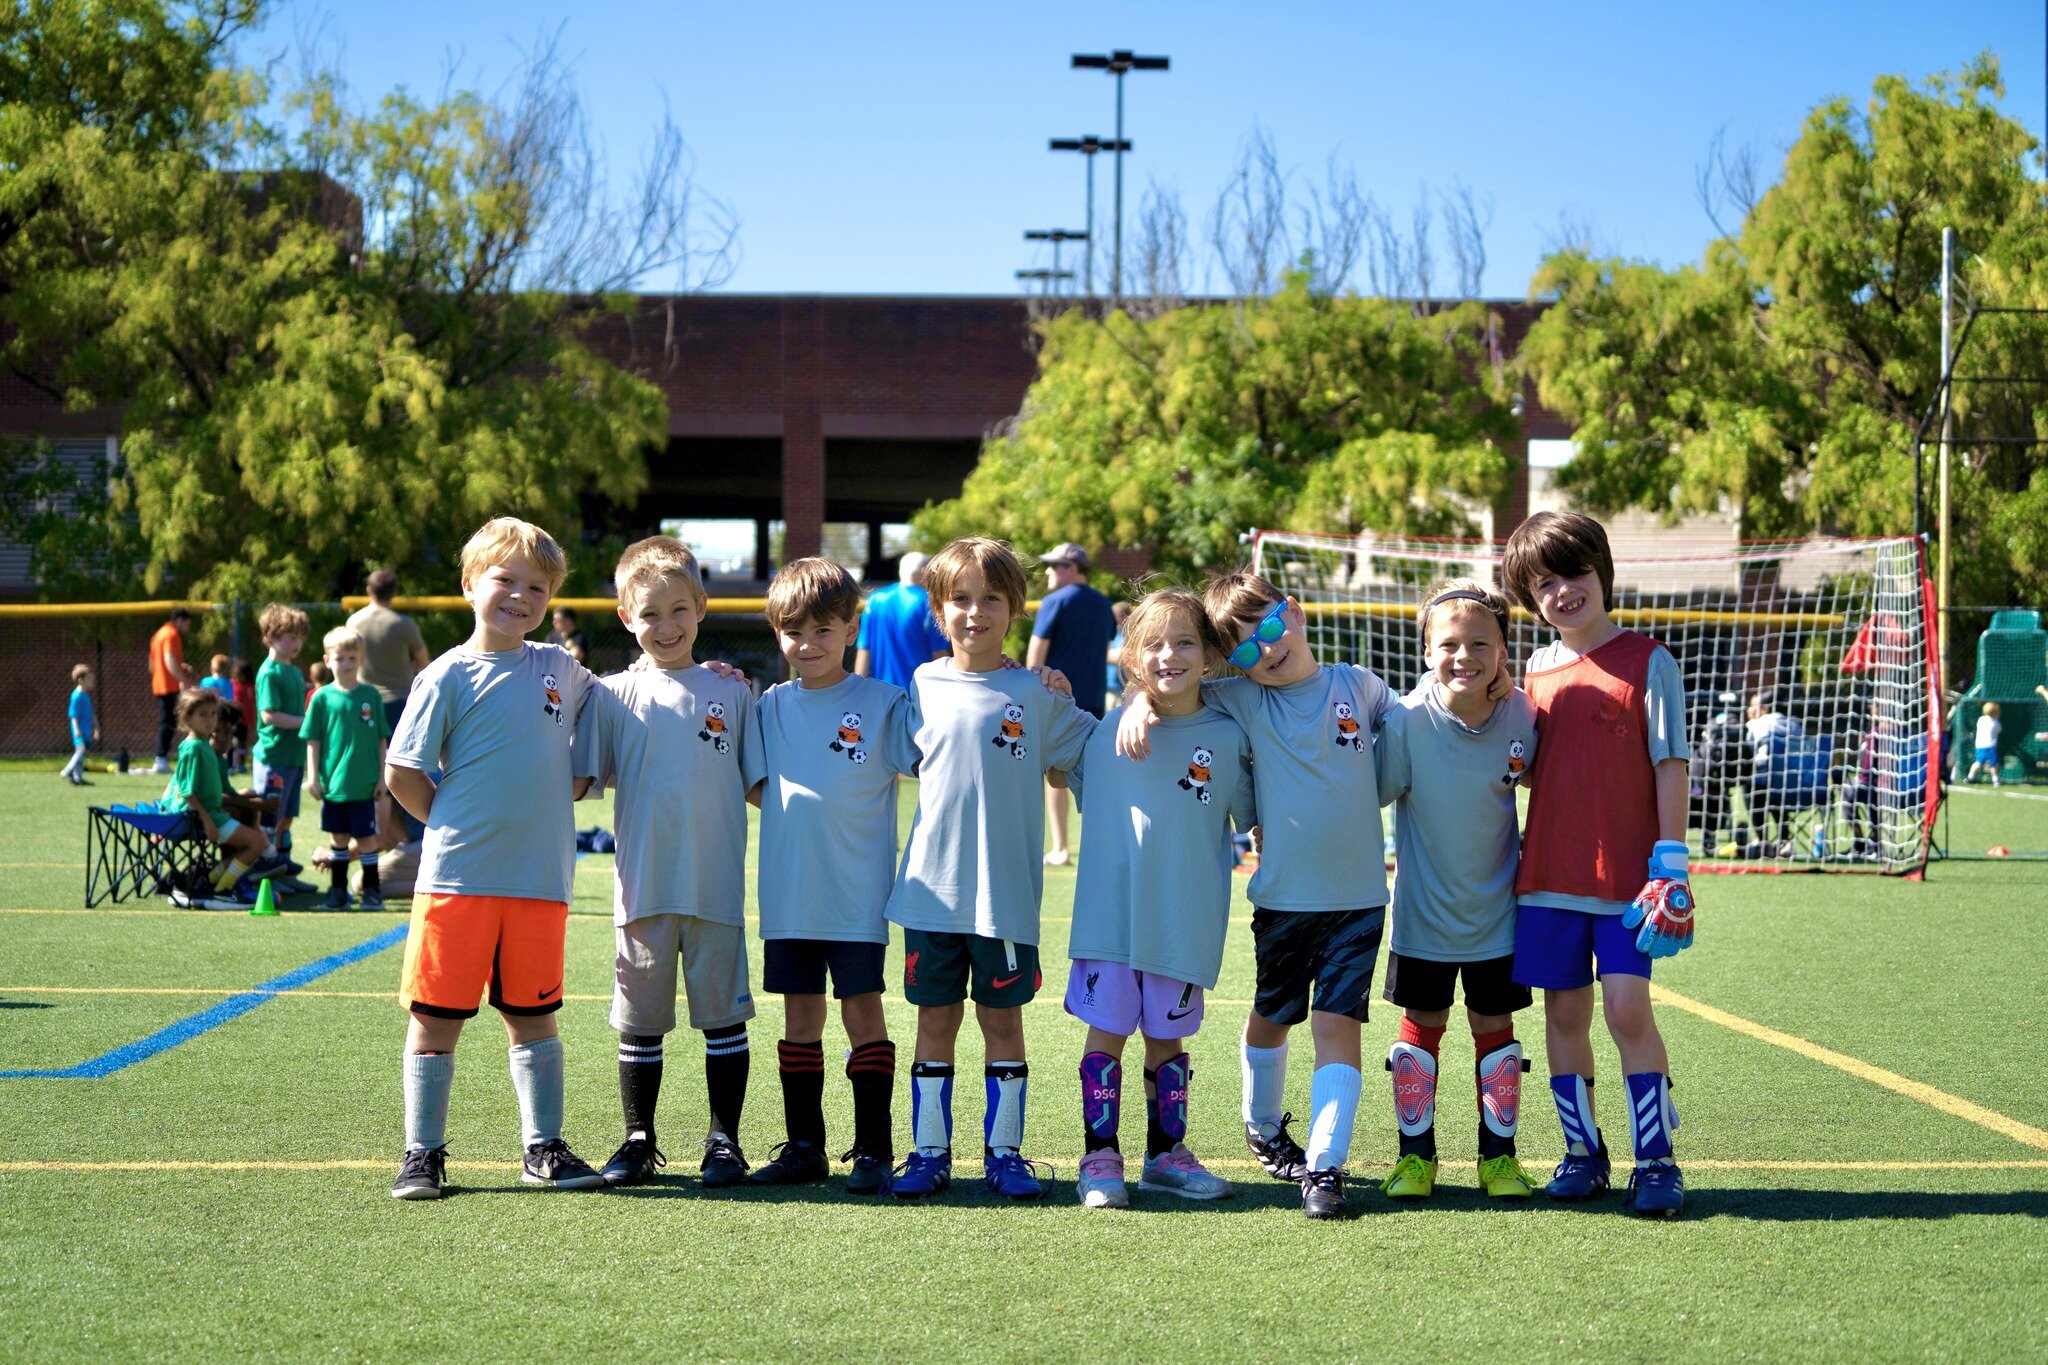 🌟 Tomorrow's adventure awaits at the RFK Fields! 🚀 Are you ready to turn your child's day off school into an unforgettable soccer fiesta? ⚽️ Join us from 9 am until 3 pm for our One Day Camp, where fun, games, and new skills collide! 🎉 

Don't let